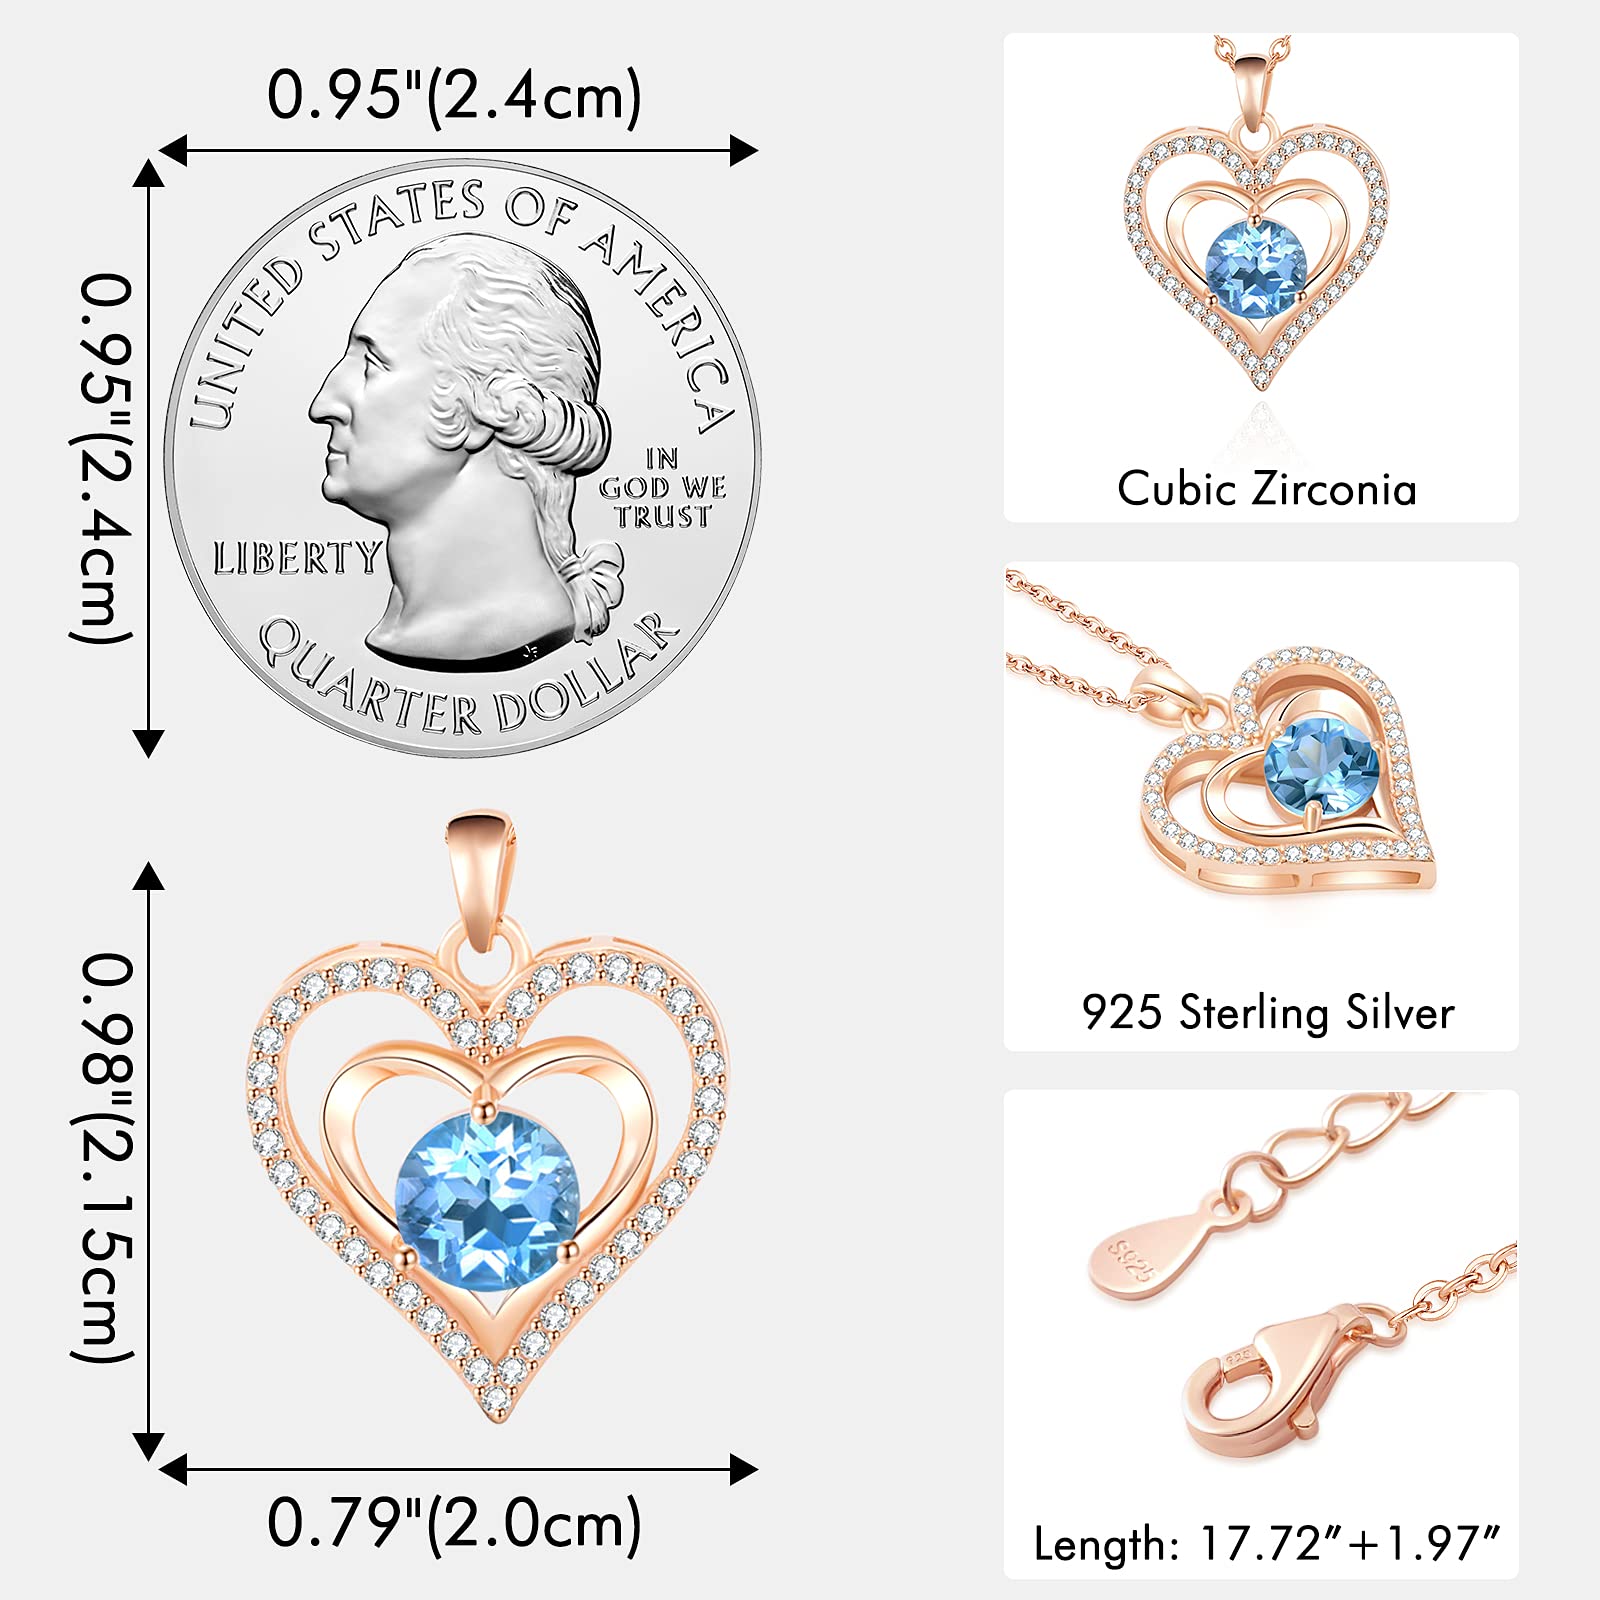 capirosa S925 Forever Love Heart Necklaces for Women Mother's Day Gifts Sterling Silver Rose Gold Diamond Birthstone Pendant Necklace Jewelry Anniversary Birthday Gifts for Mom Wife Her Girlfriend